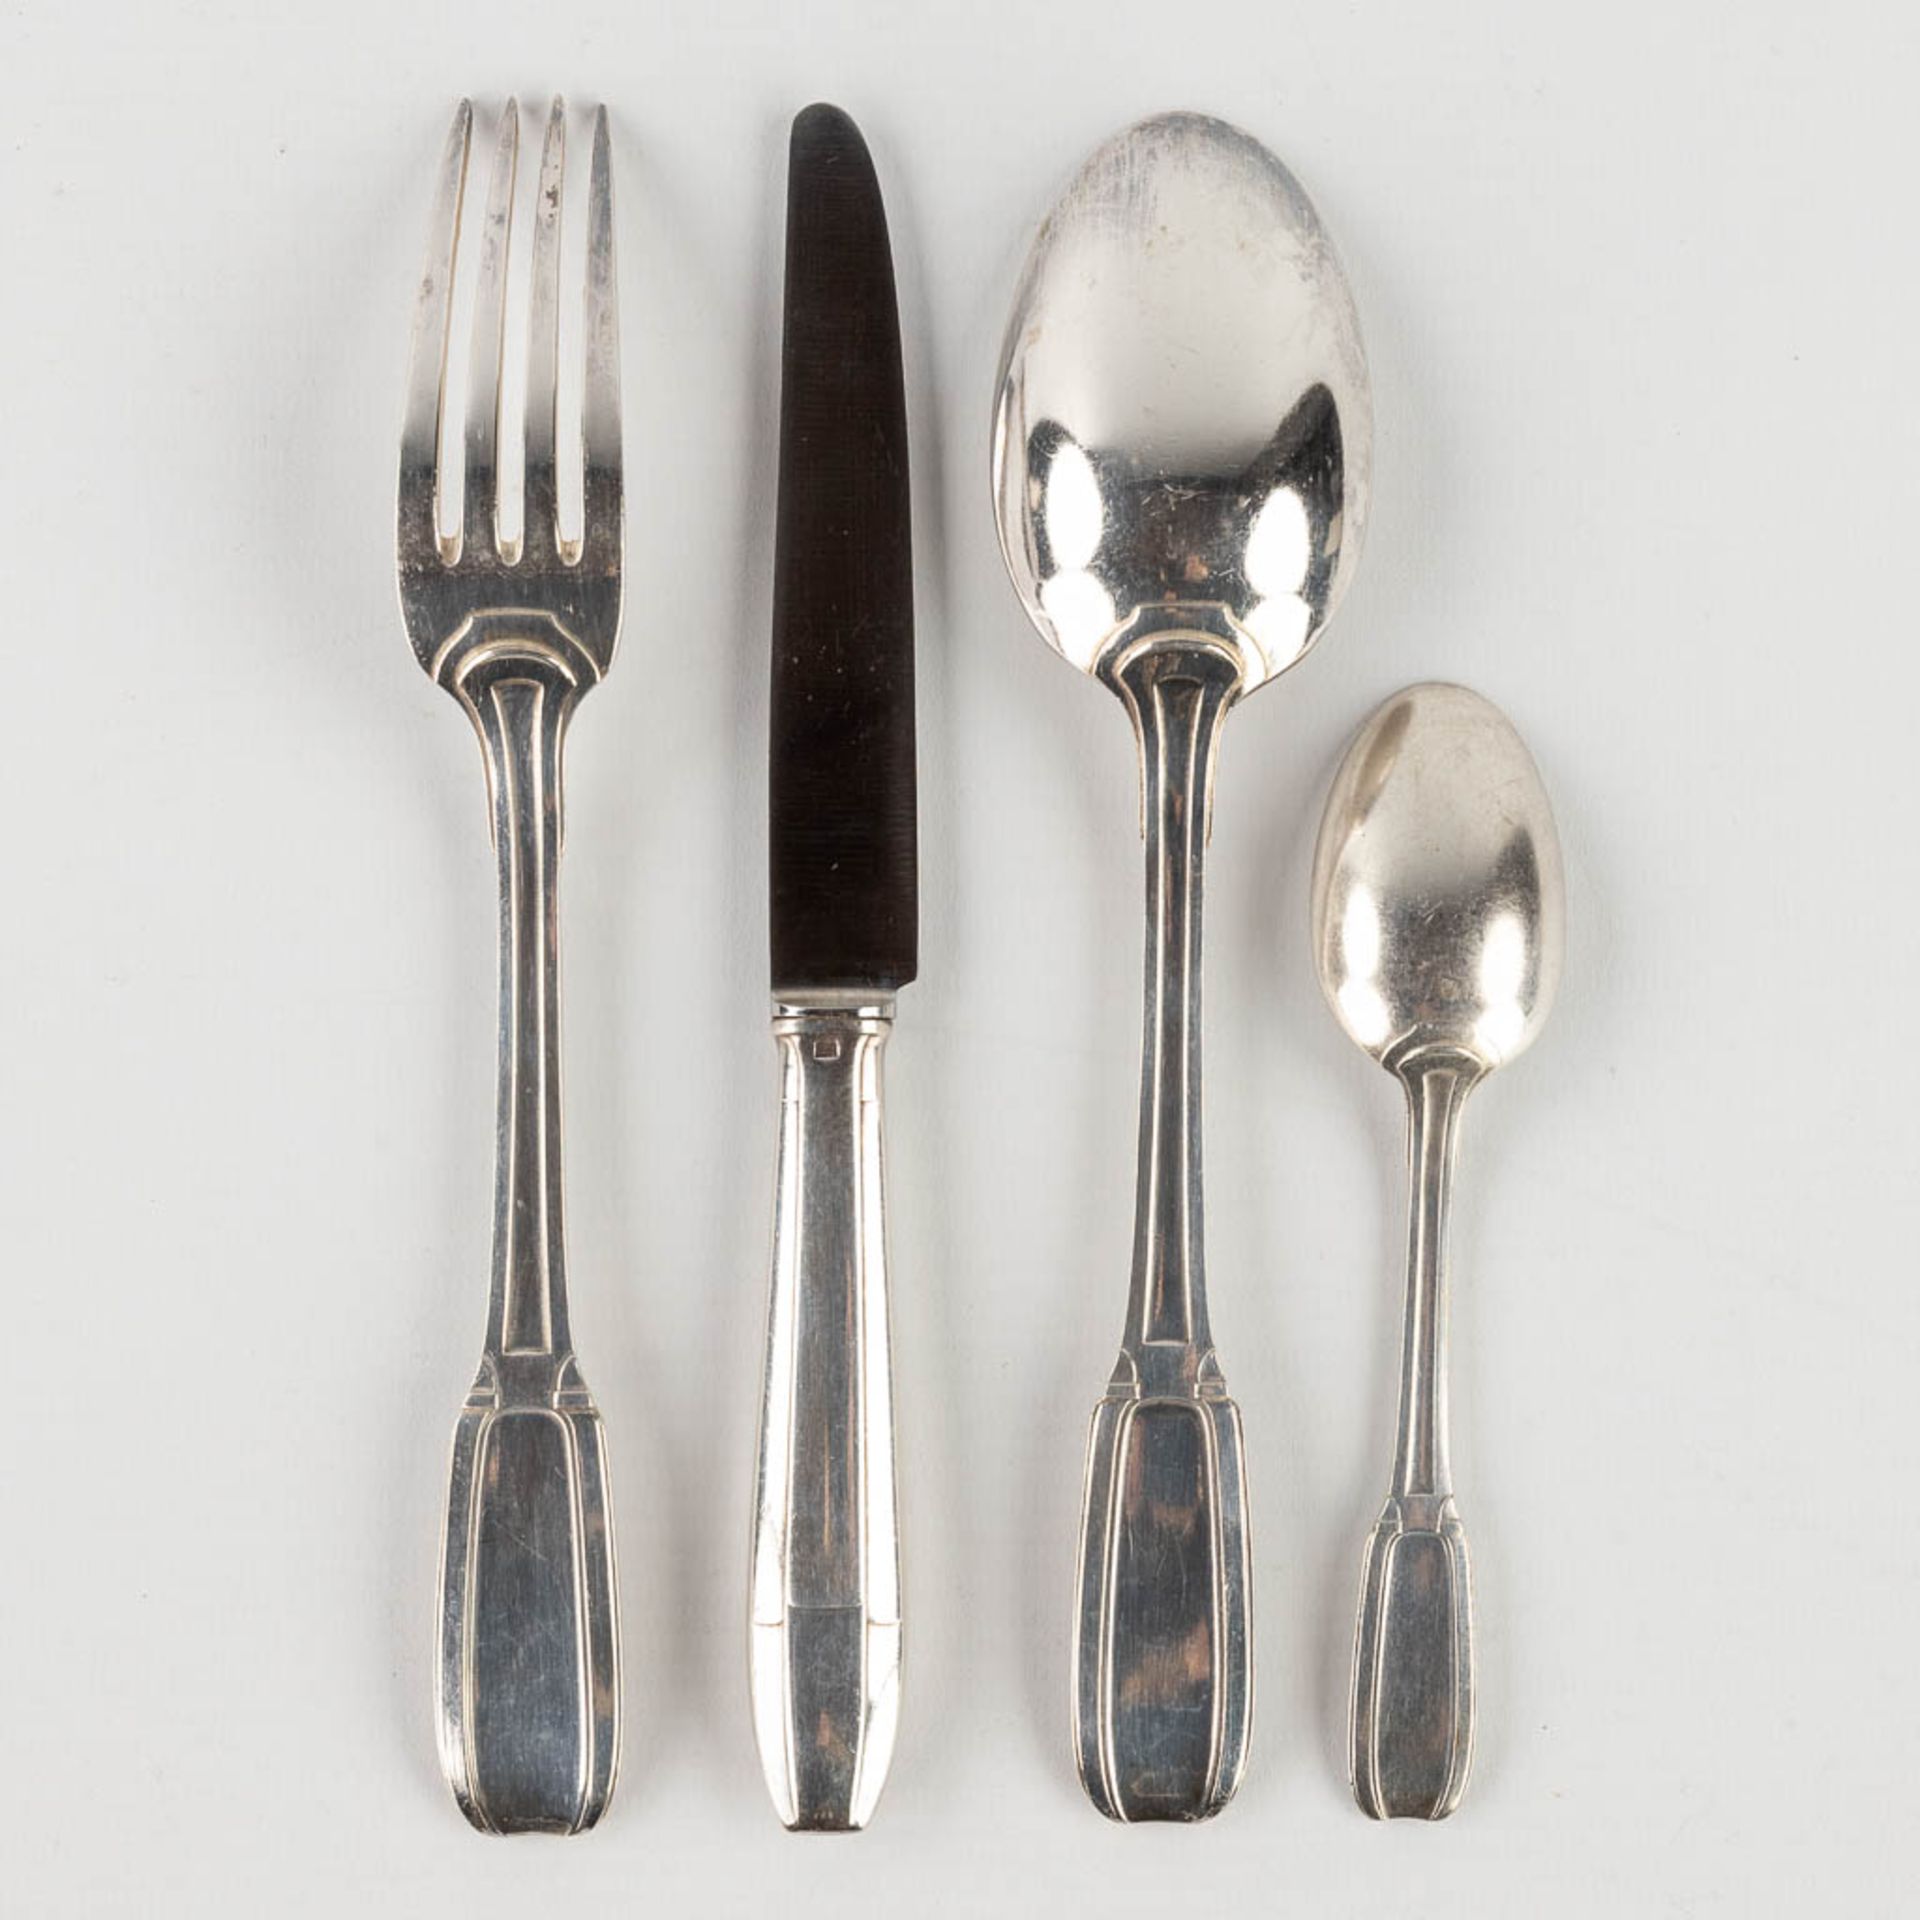 Two Ecrins with silver spoons, added 1 Ecrin with pieces of silver-plated cutlery marked Boulinger. - Image 5 of 18